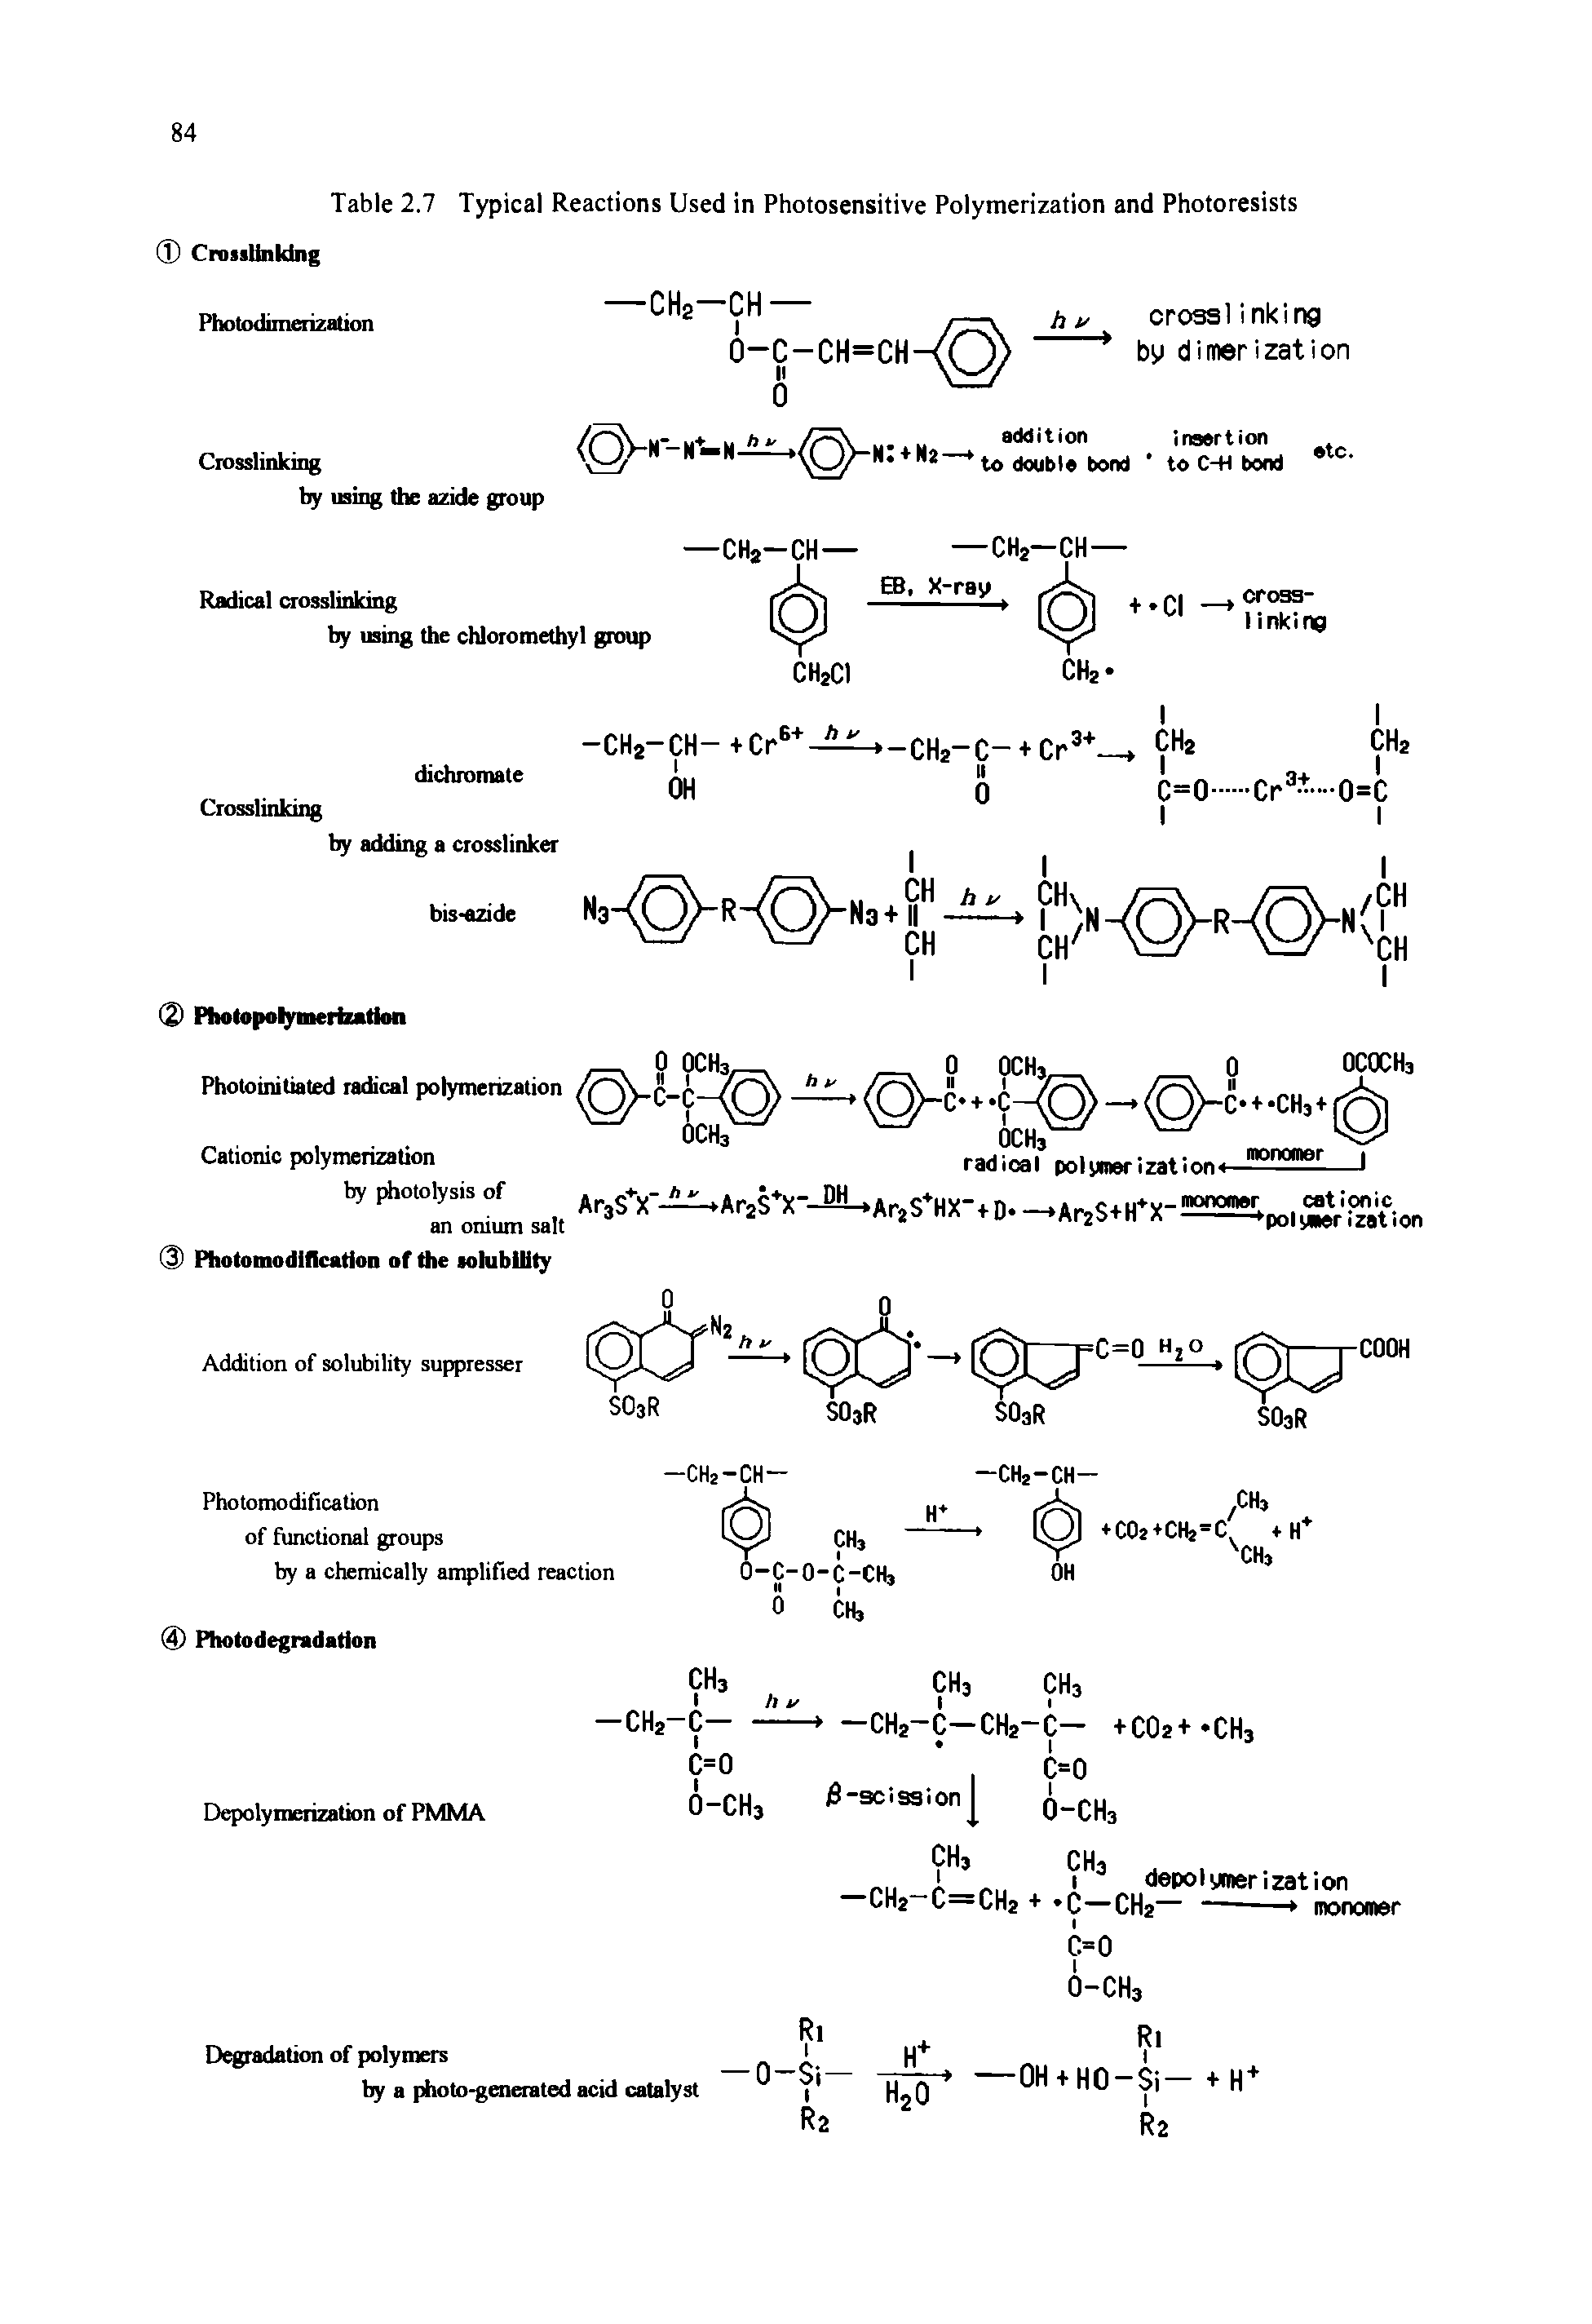 Table 2.7 Typical Reactions Used in Photosensitive Polymerization and Photoresists...